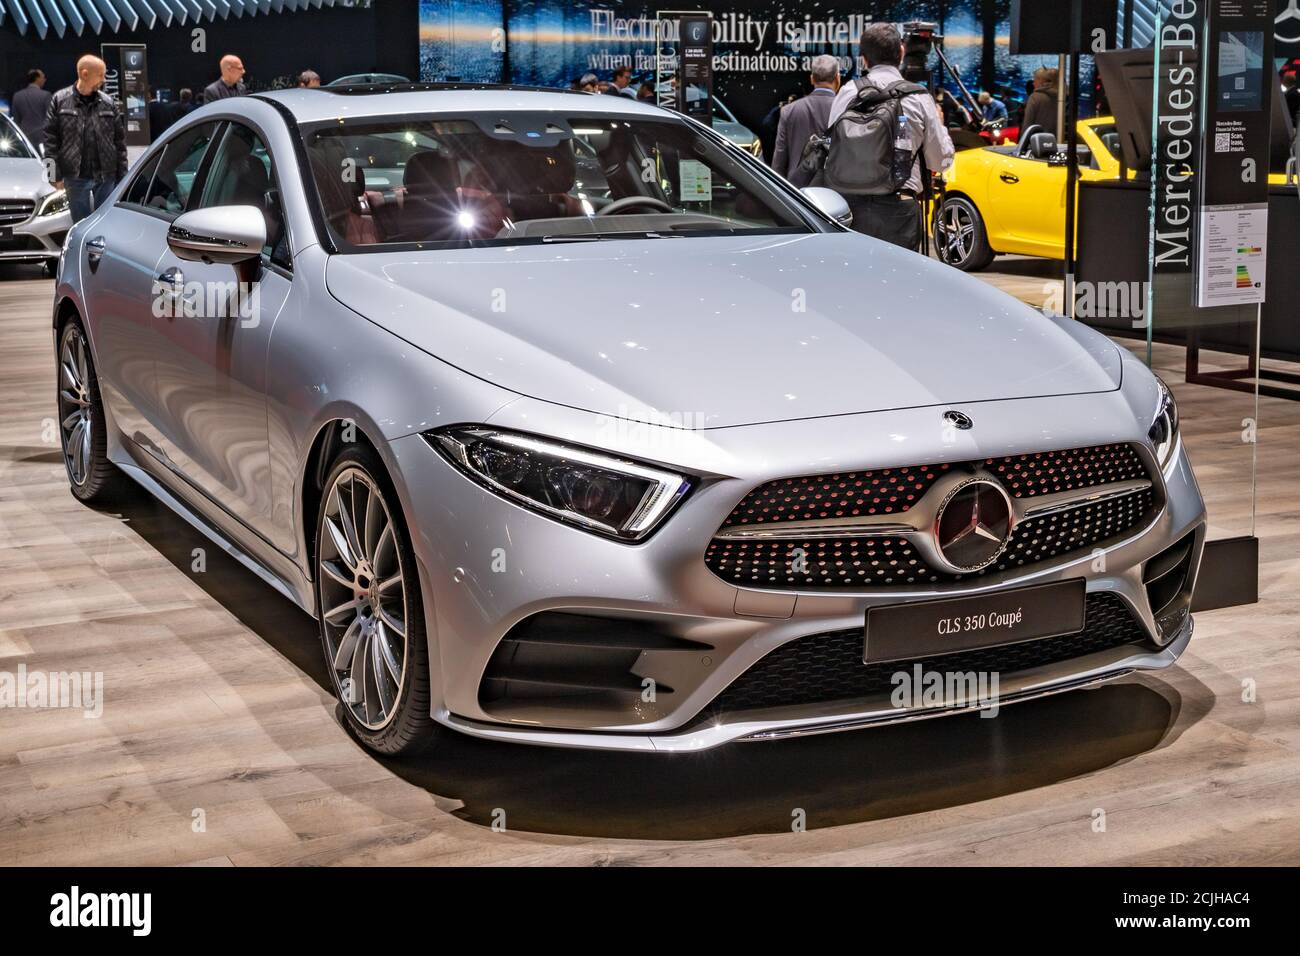 Mercedes Benz CLS 350 Coupe car at the 89th Geneva International Motor  Show. Geneva, Switzerland - March 5, 2019 Stock Photo - Alamy